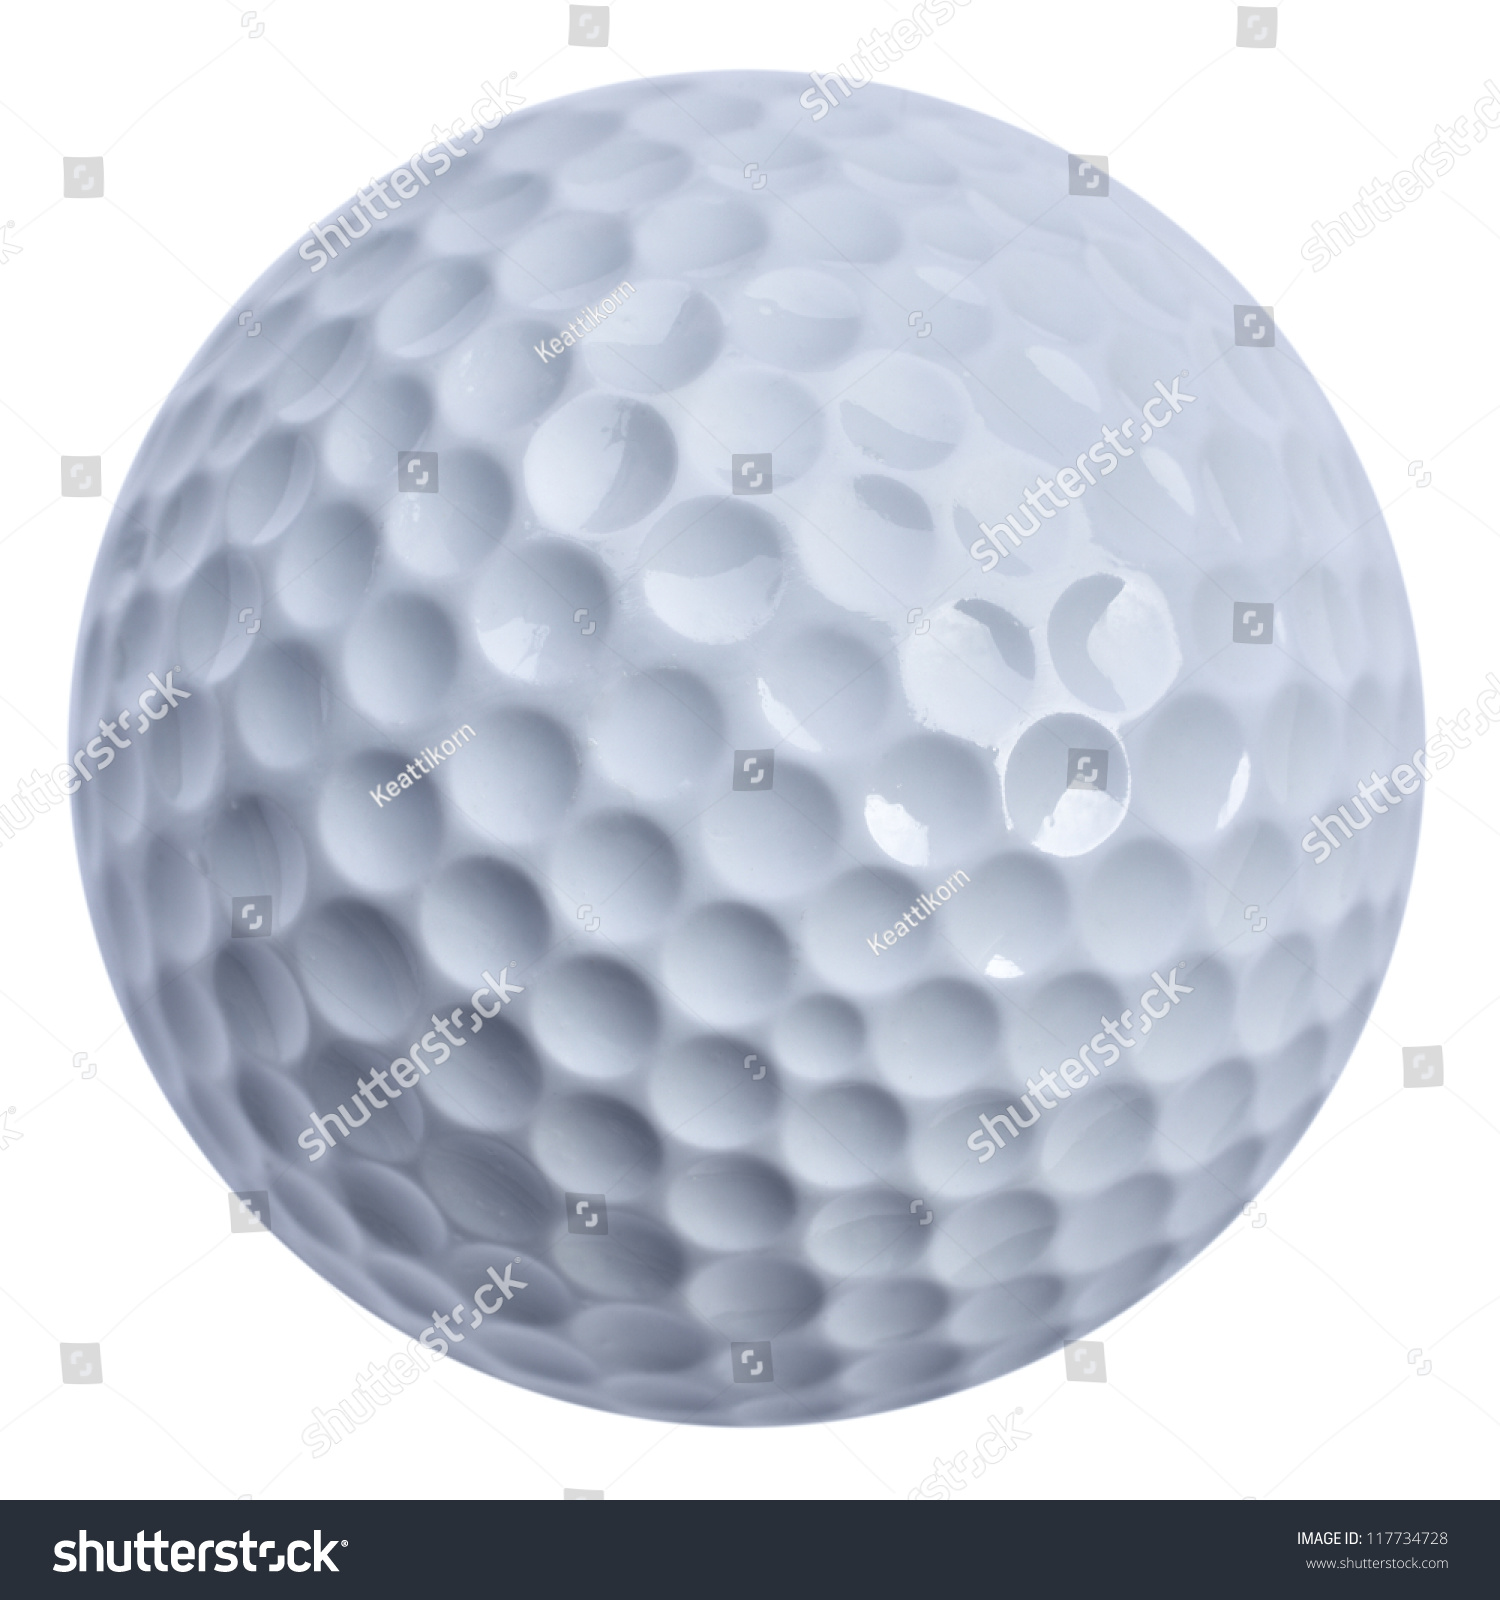 Golf ball isolated with clippin path, real golf ball not 3D rendering #117734728